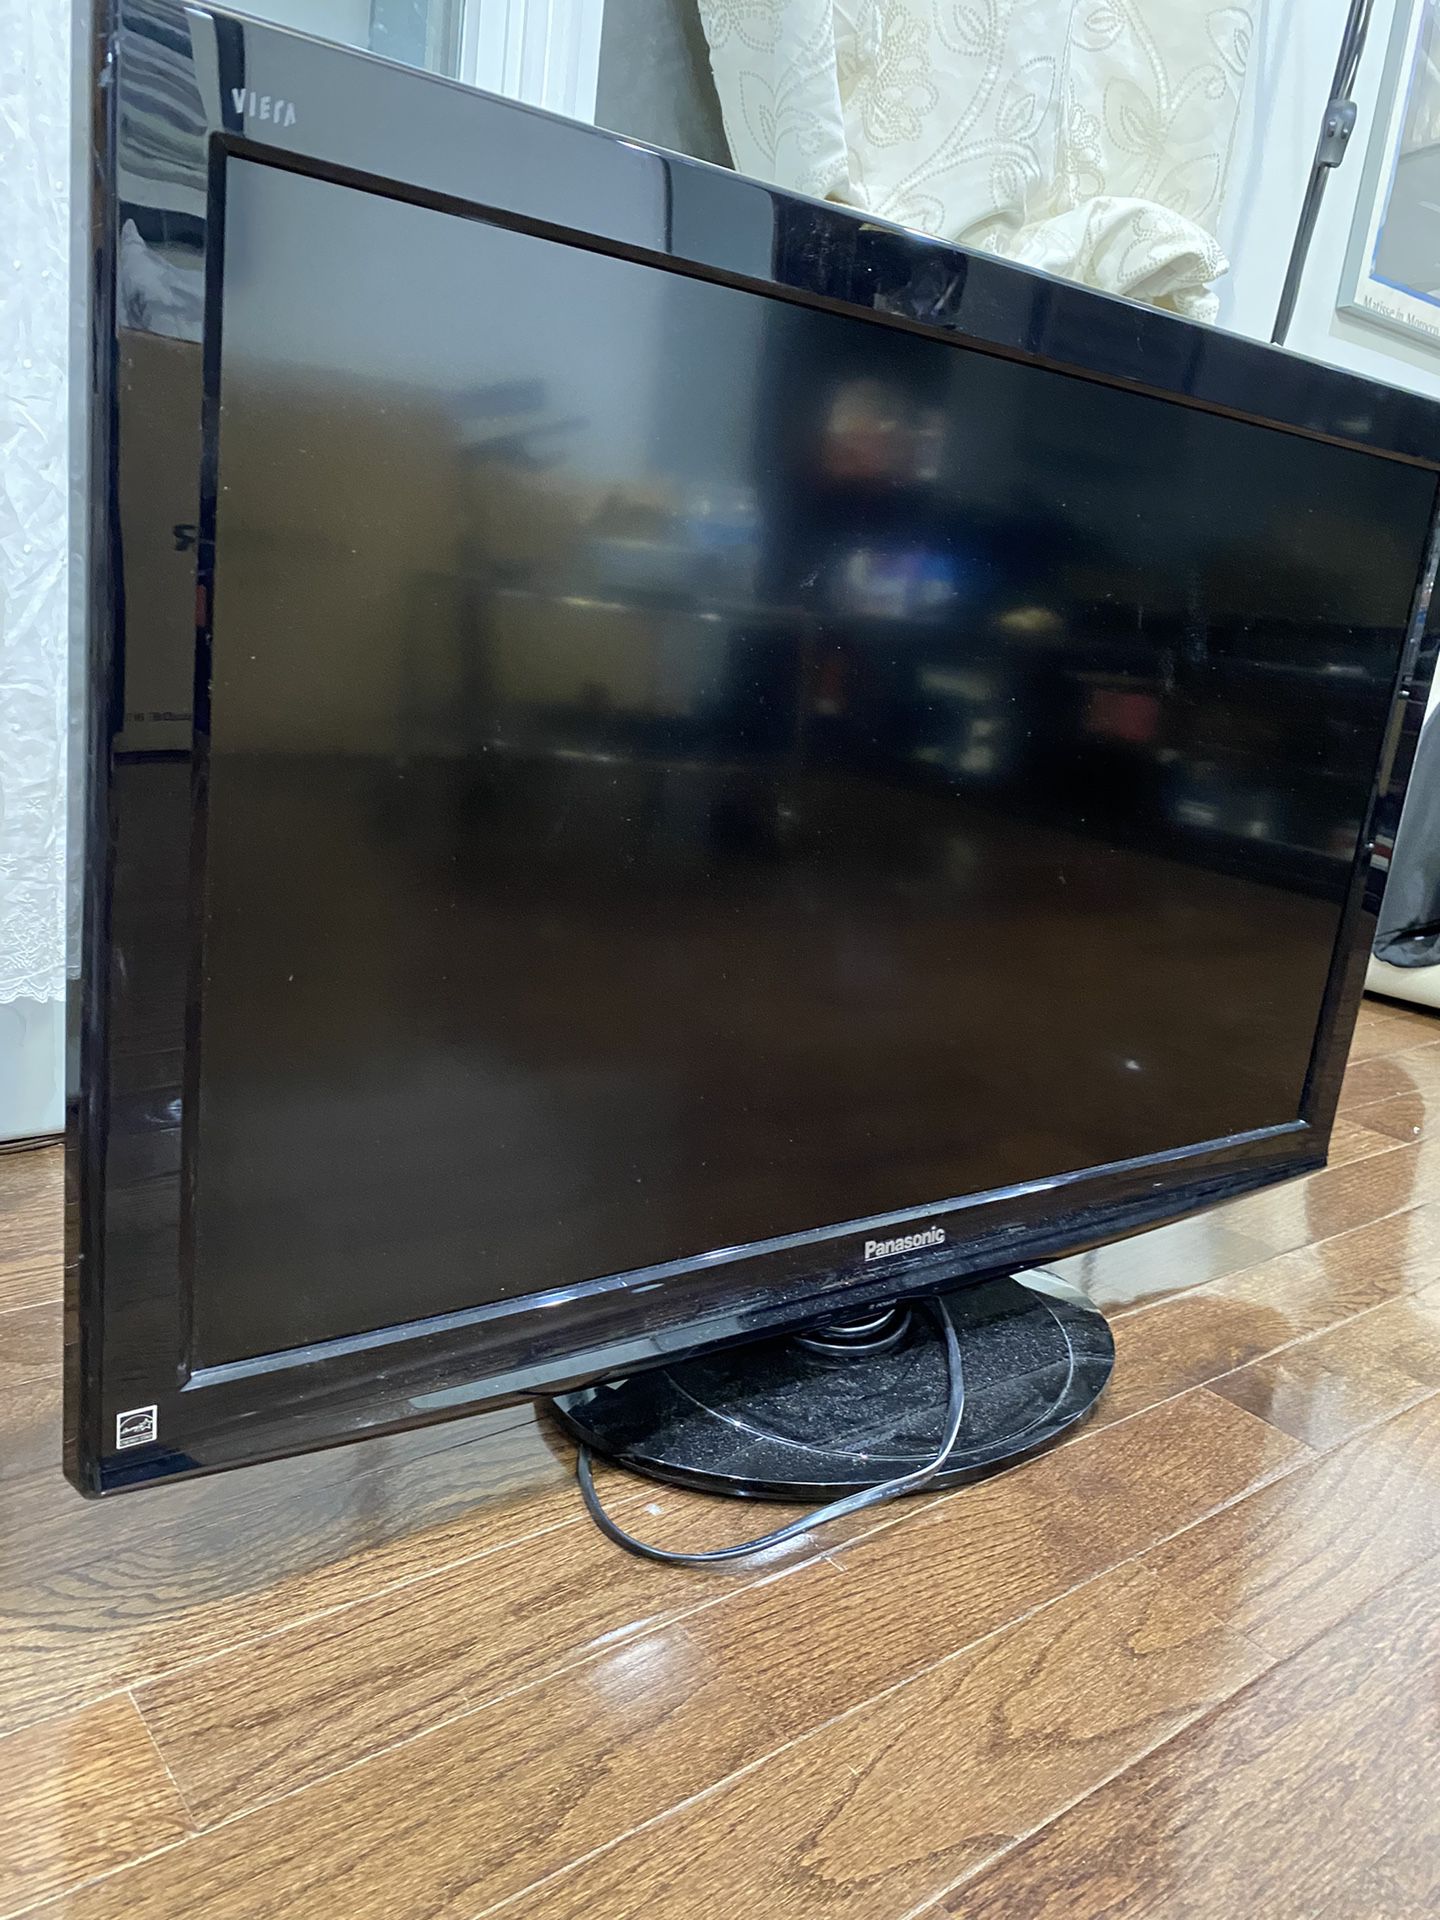 Panasonic Tv For Only $50